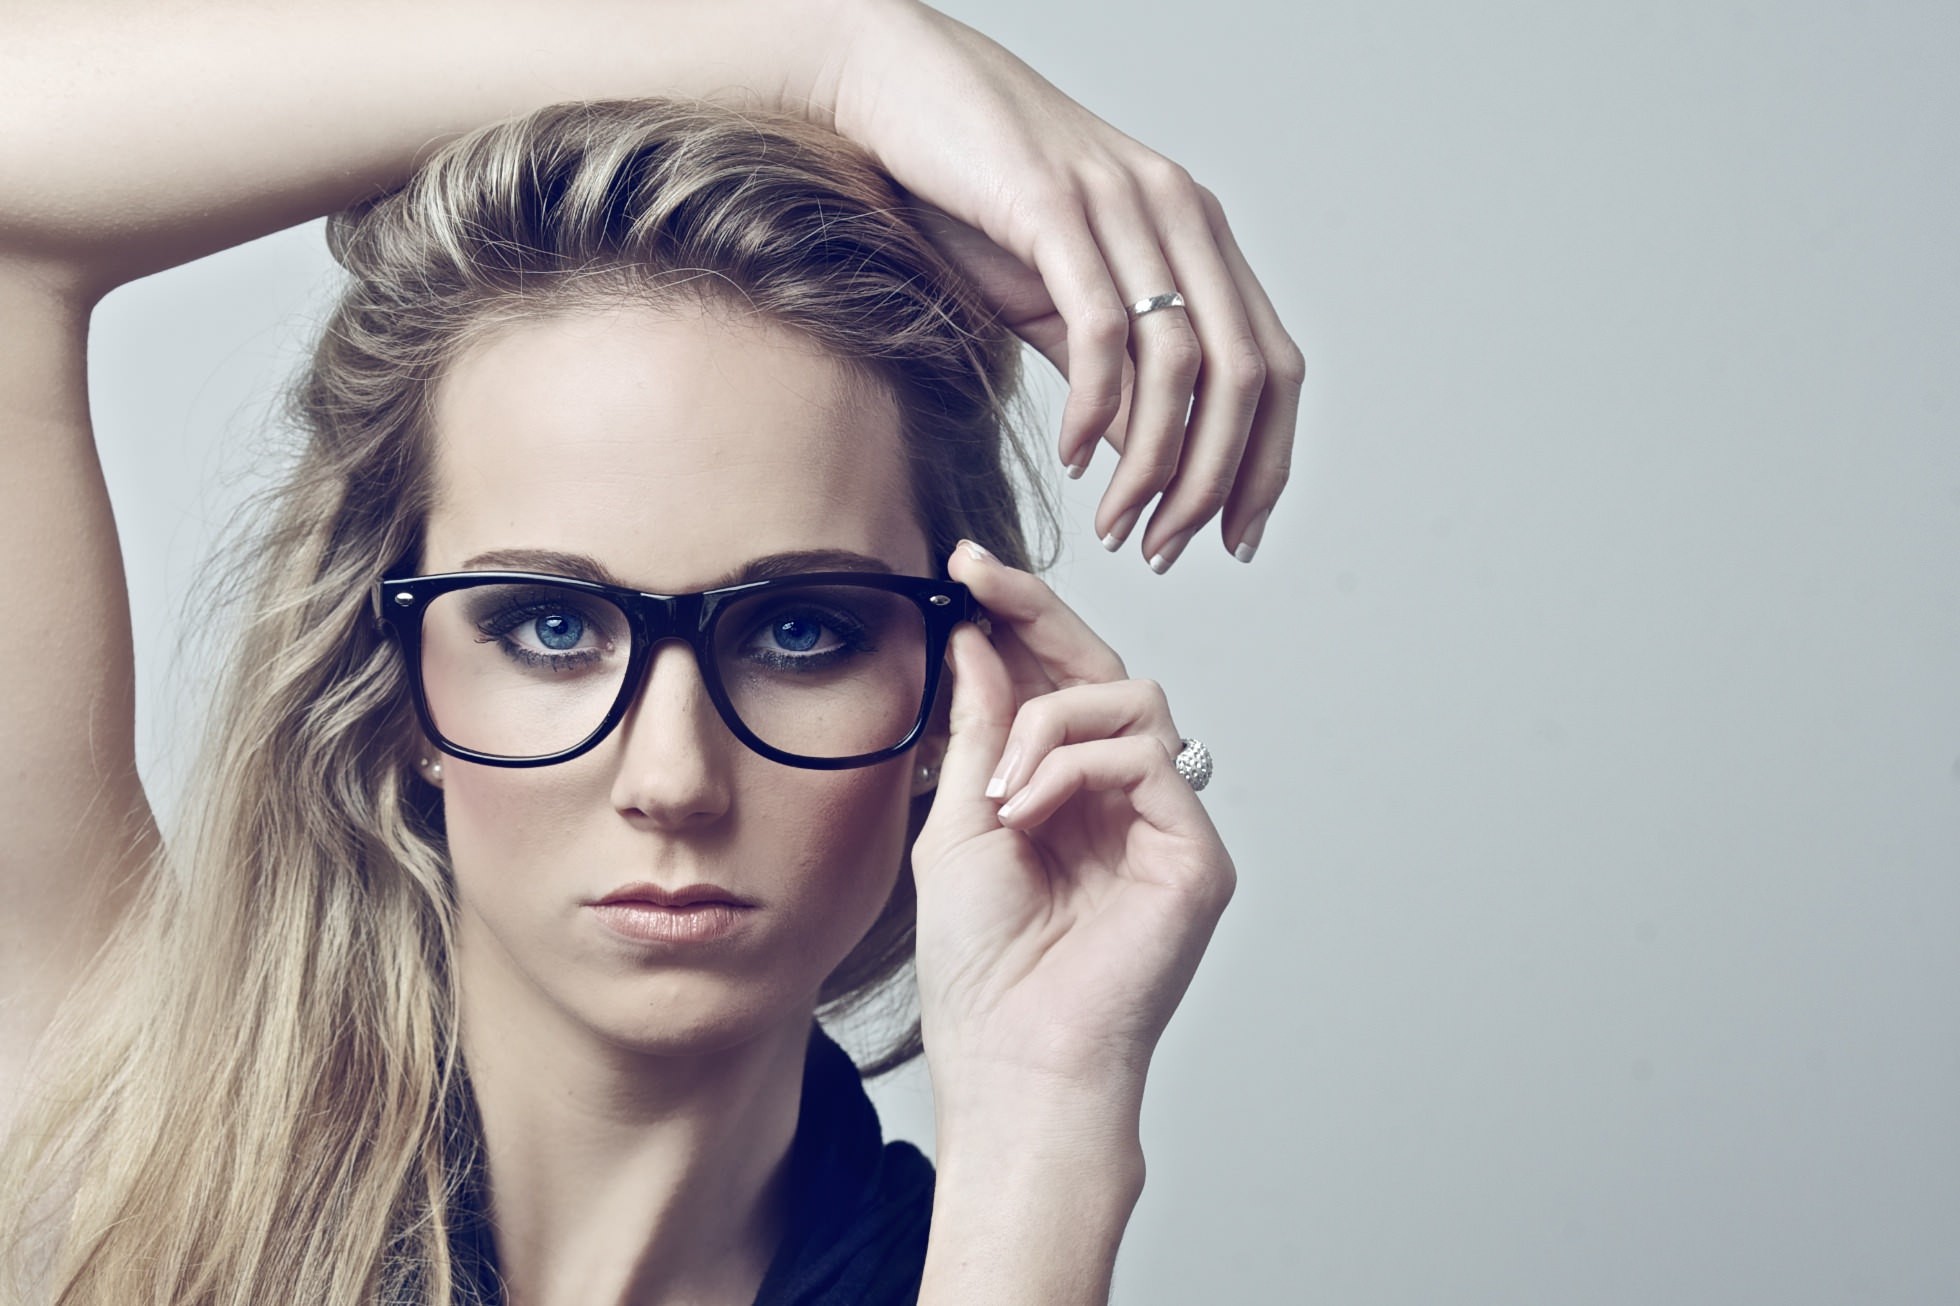 Women Blonde Face Portrait Women With Glasses White Background Touching Glasses 1960x1306